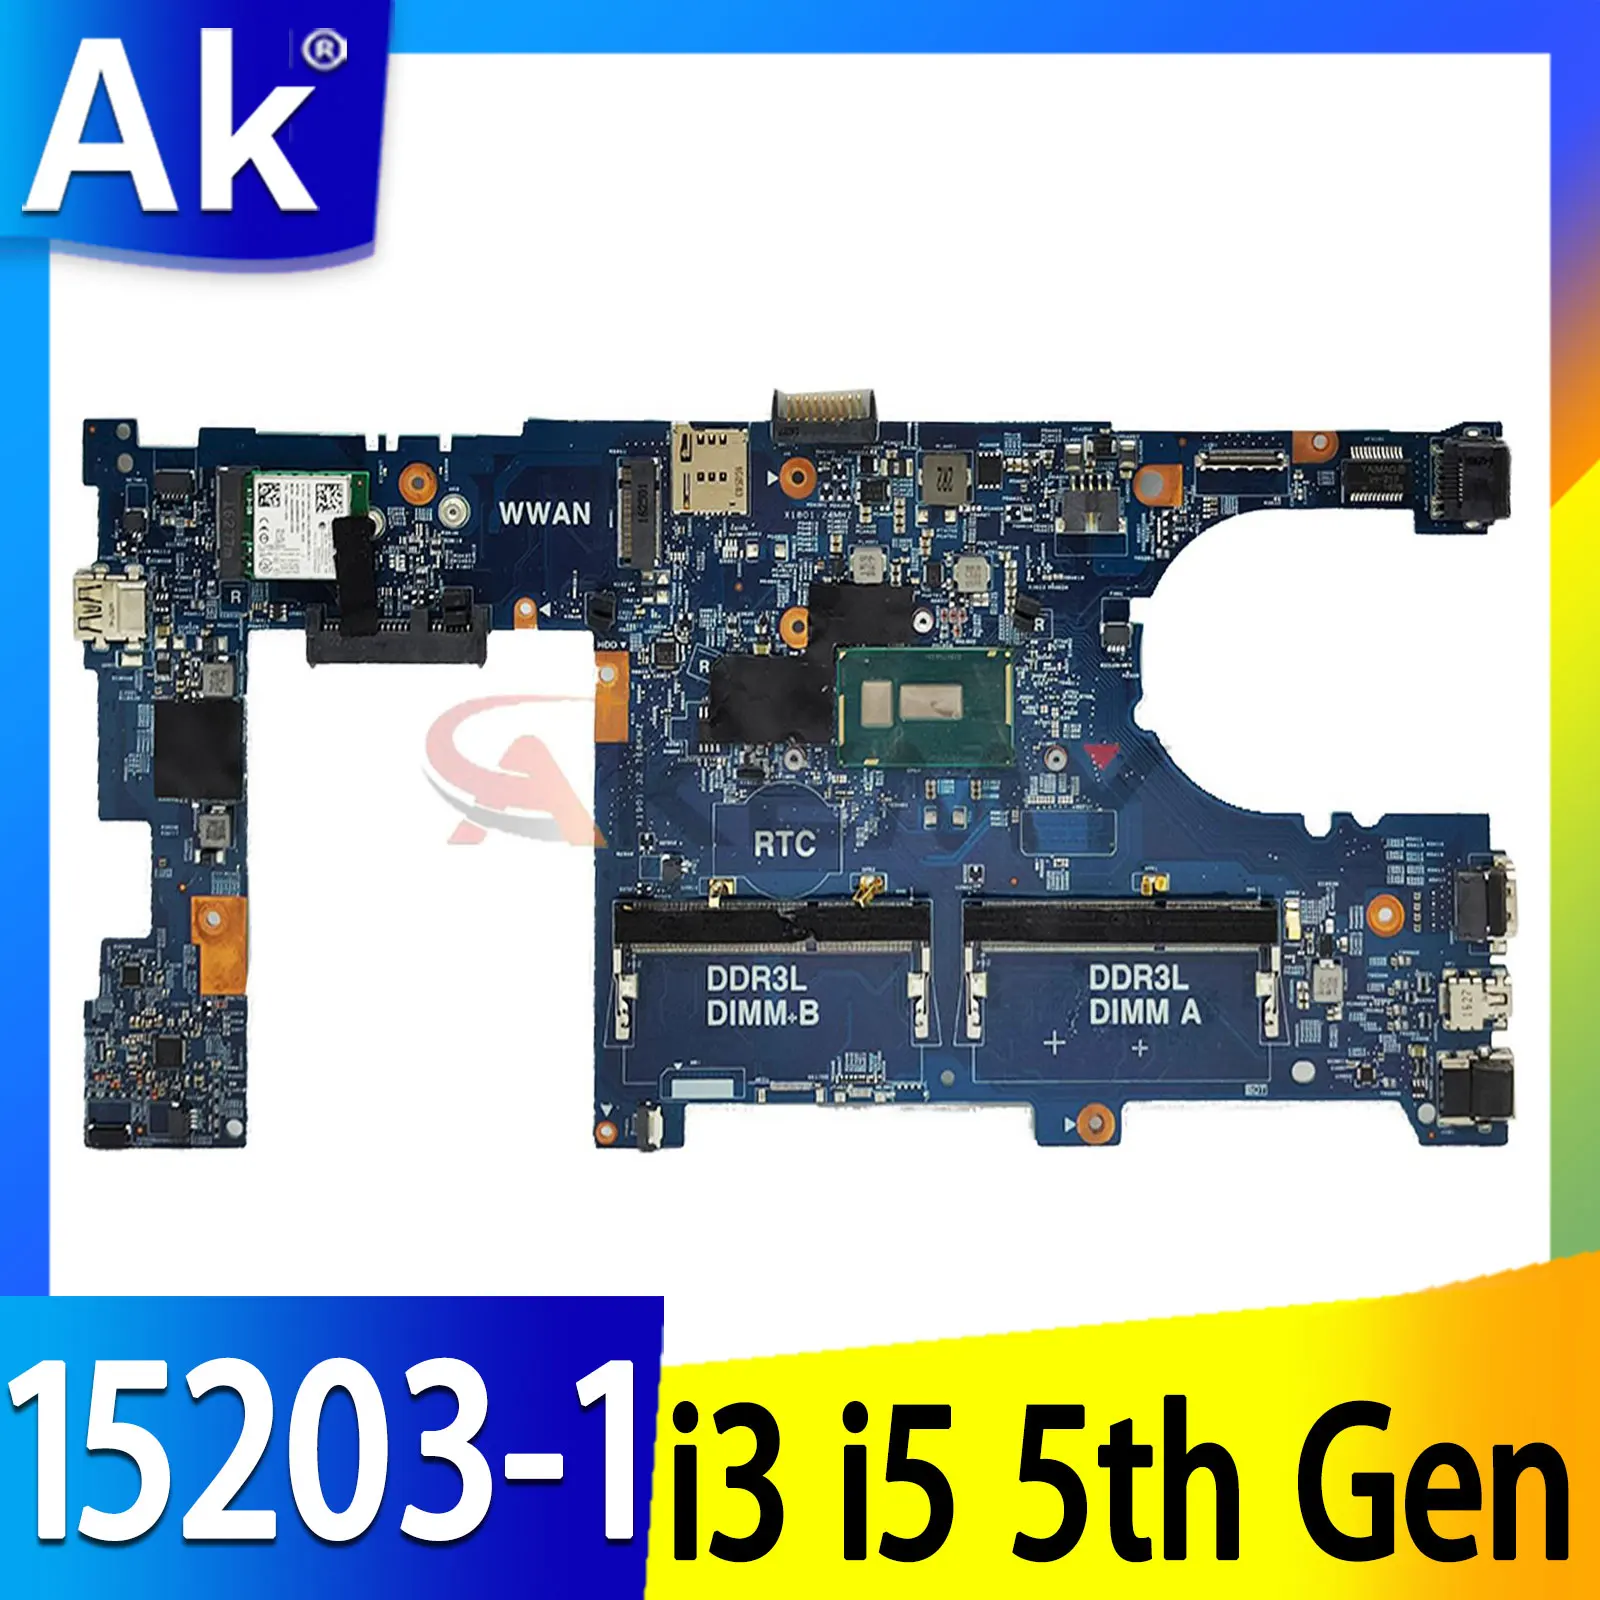 

Laptop motherboard For DELL latitude 3350 L3350 Mainboard 15203-1 CN-028CG2 0P0WRG Mainboard with pentium cpu i3 i5 5th Gen CPU